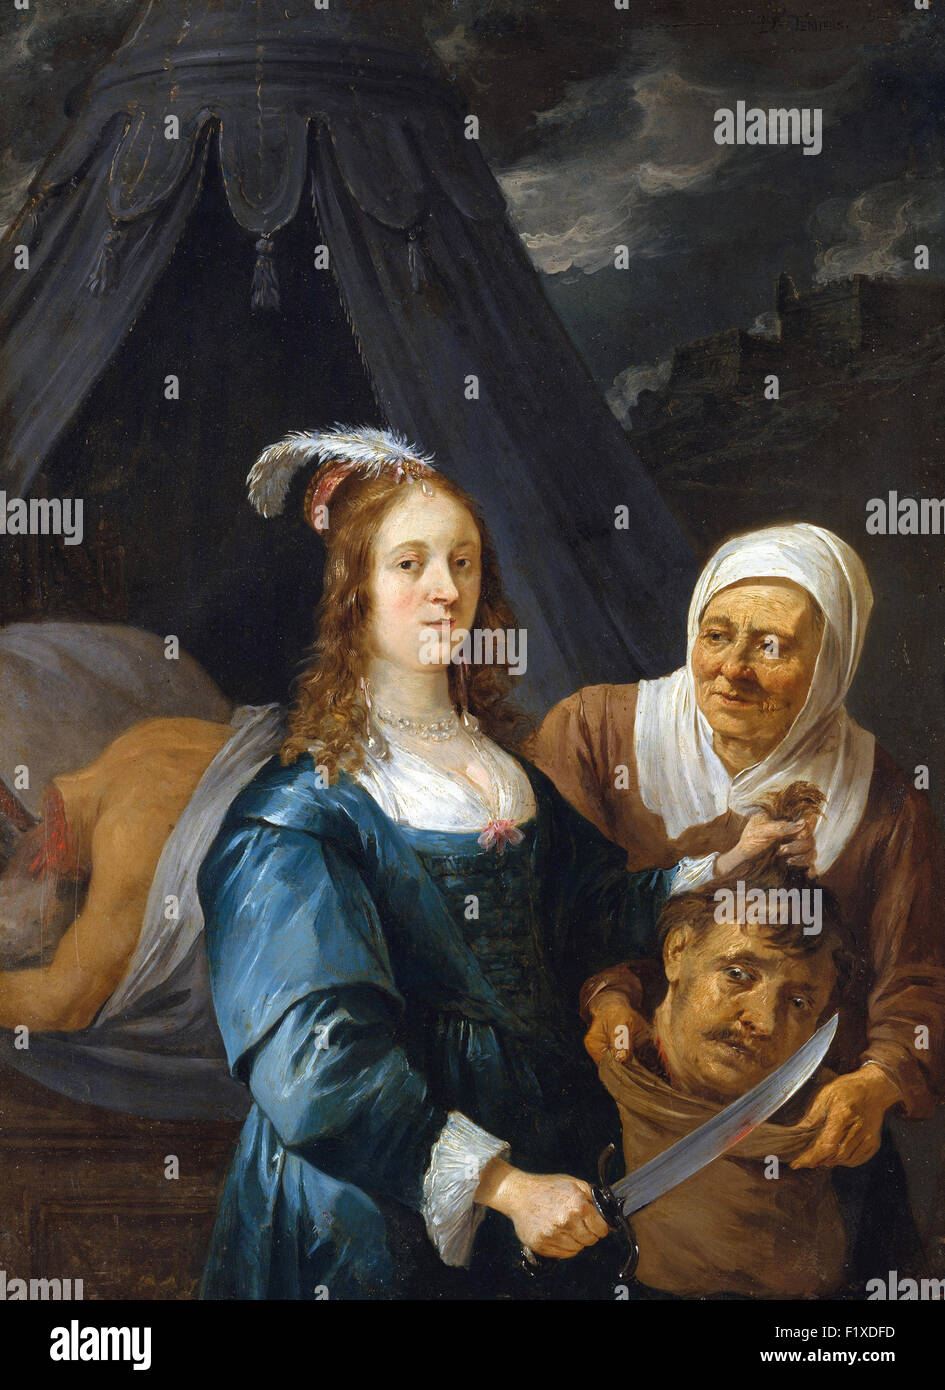 David Teniers the Younger - Judith with the Head of Holofernes Stock Photo